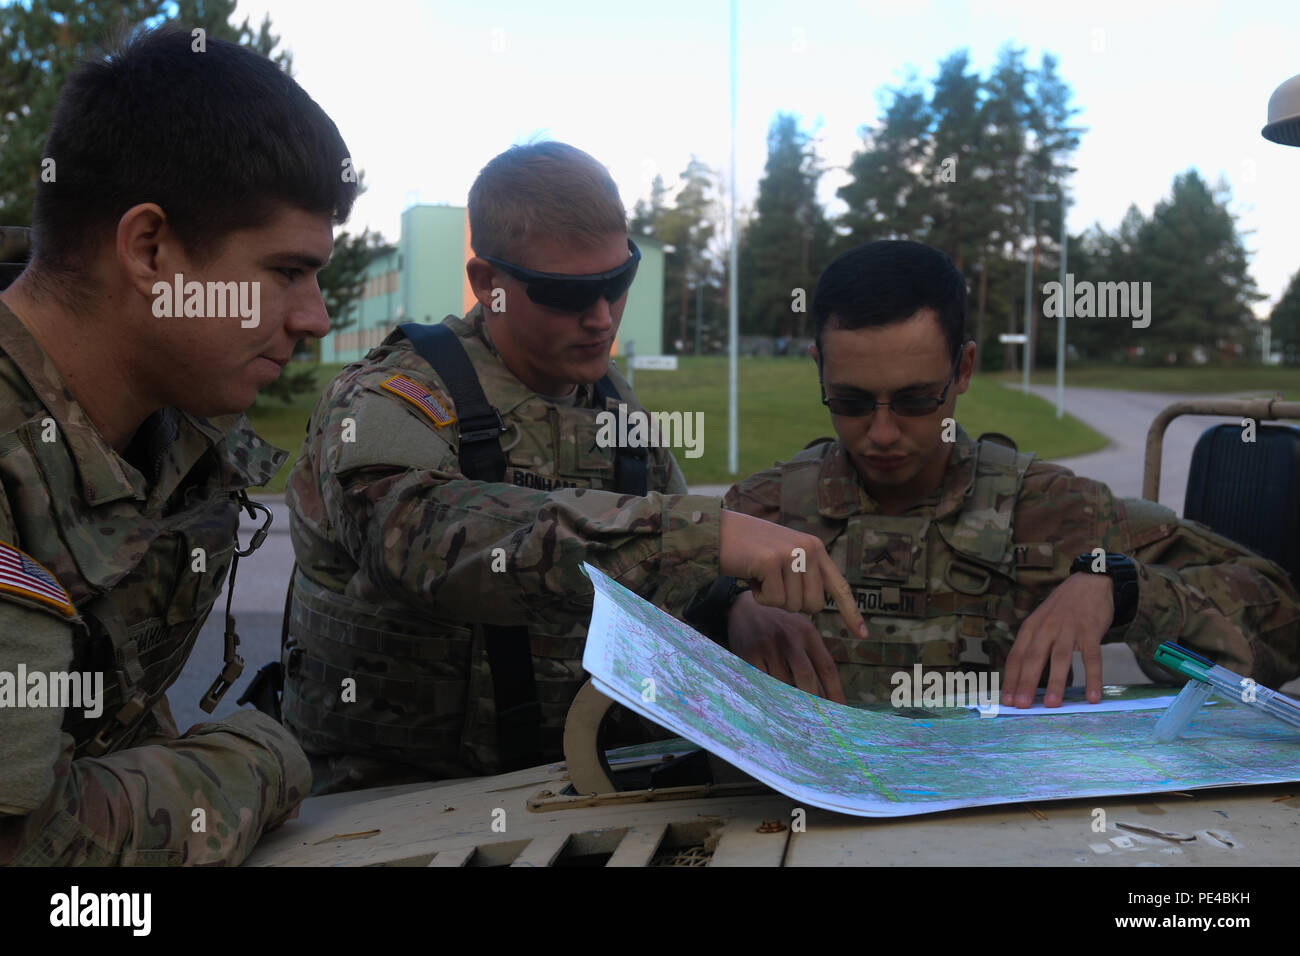 Spc. Skylar M. McMahon (left to rigth), Pvt. Michael V. Bonham, and Cpl. Evan A. Marroquin, Soldiers assigned to Destined Company, 2nd Battalion, 503rd Infantry Regiment, 173rd Airborne Brigade, plot coordinates on a map during a land navigation course exercise in Voru, Estonia, Sept. 9, as part of Swift Bayonet, a training exercise that is part of Operation Atlantic Resolve. The hands-on practical exercises ensured confidence for real-world scenarios factoring in weather and terrain. (U.S. Army photo by Spc. Jacqueline Dowland, 13th Public Affairs Detachment) Stock Photo